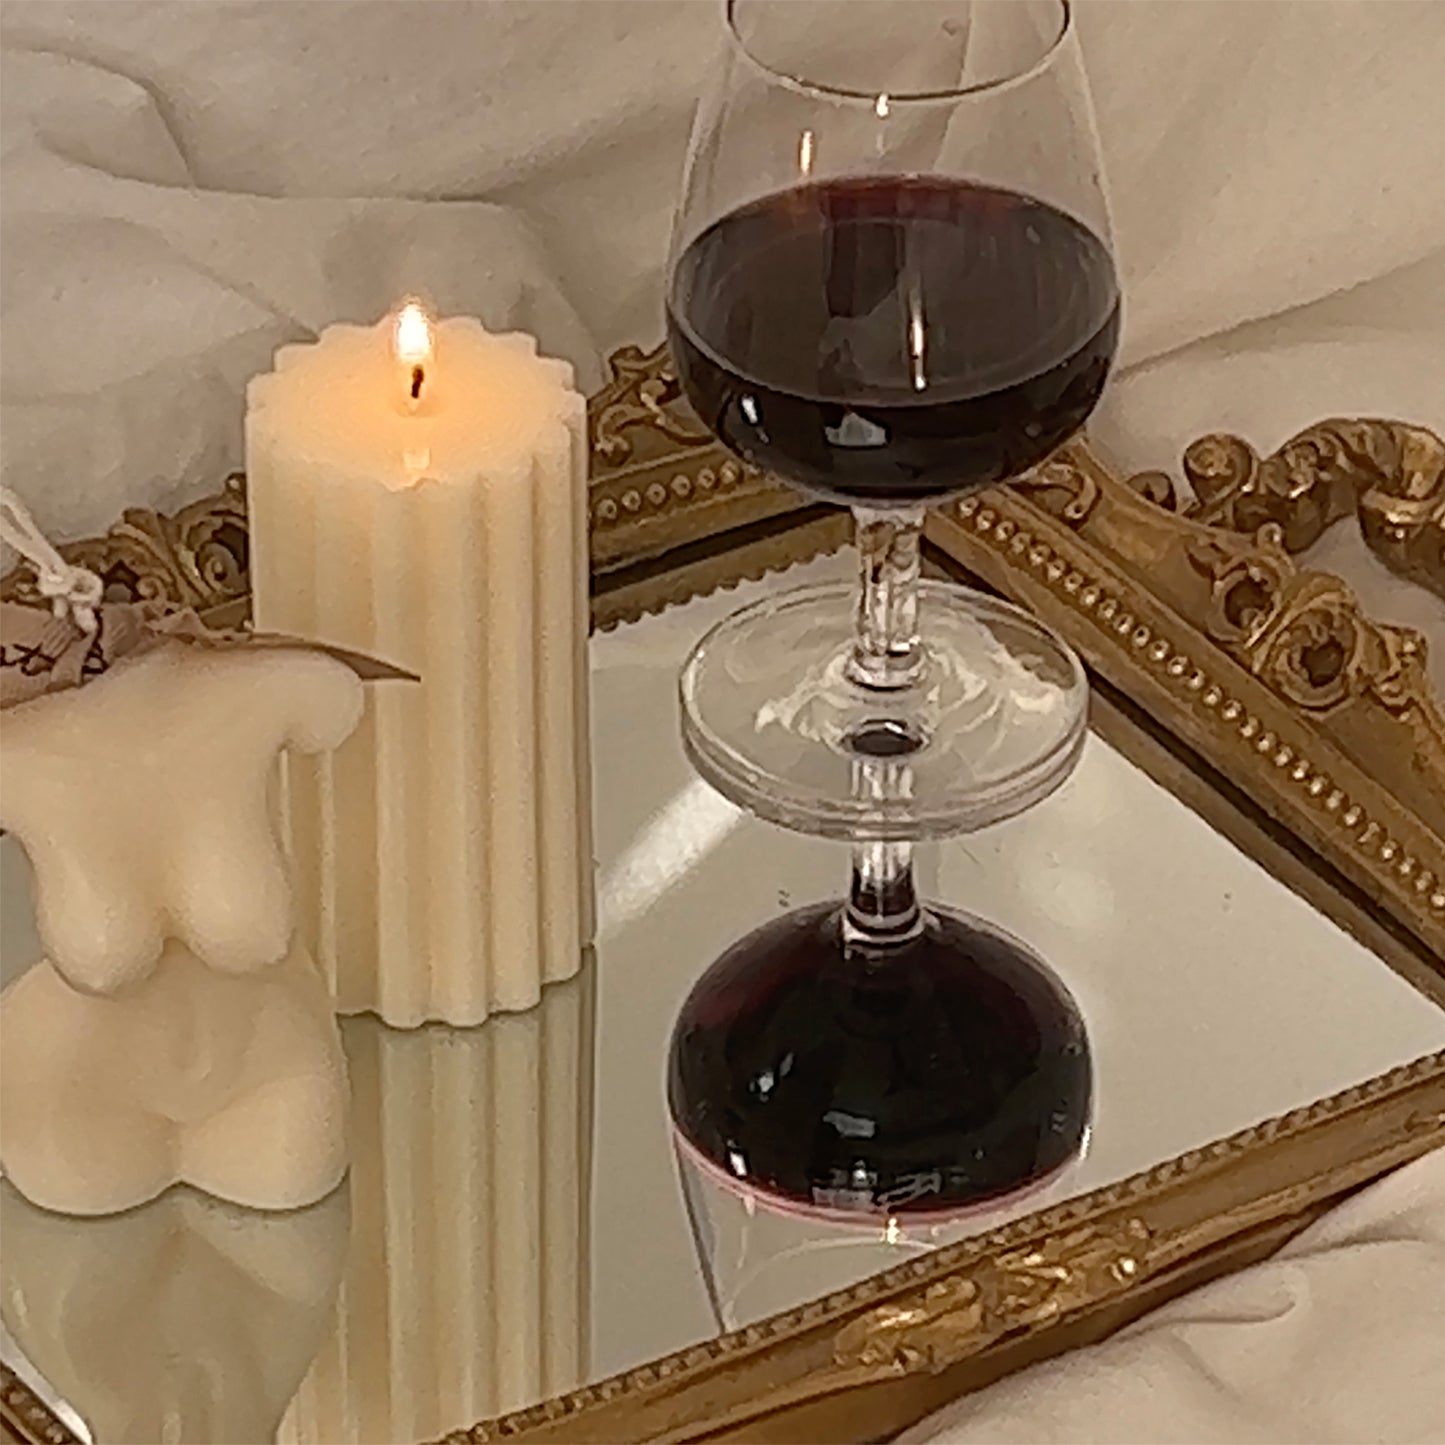 feminine small size body shape white soy pillar candle with beige bluewine studio ribbon, white ribbed soy pillar sculptural candle, and a glass of red wine on the gold french mirror tray placed on bed